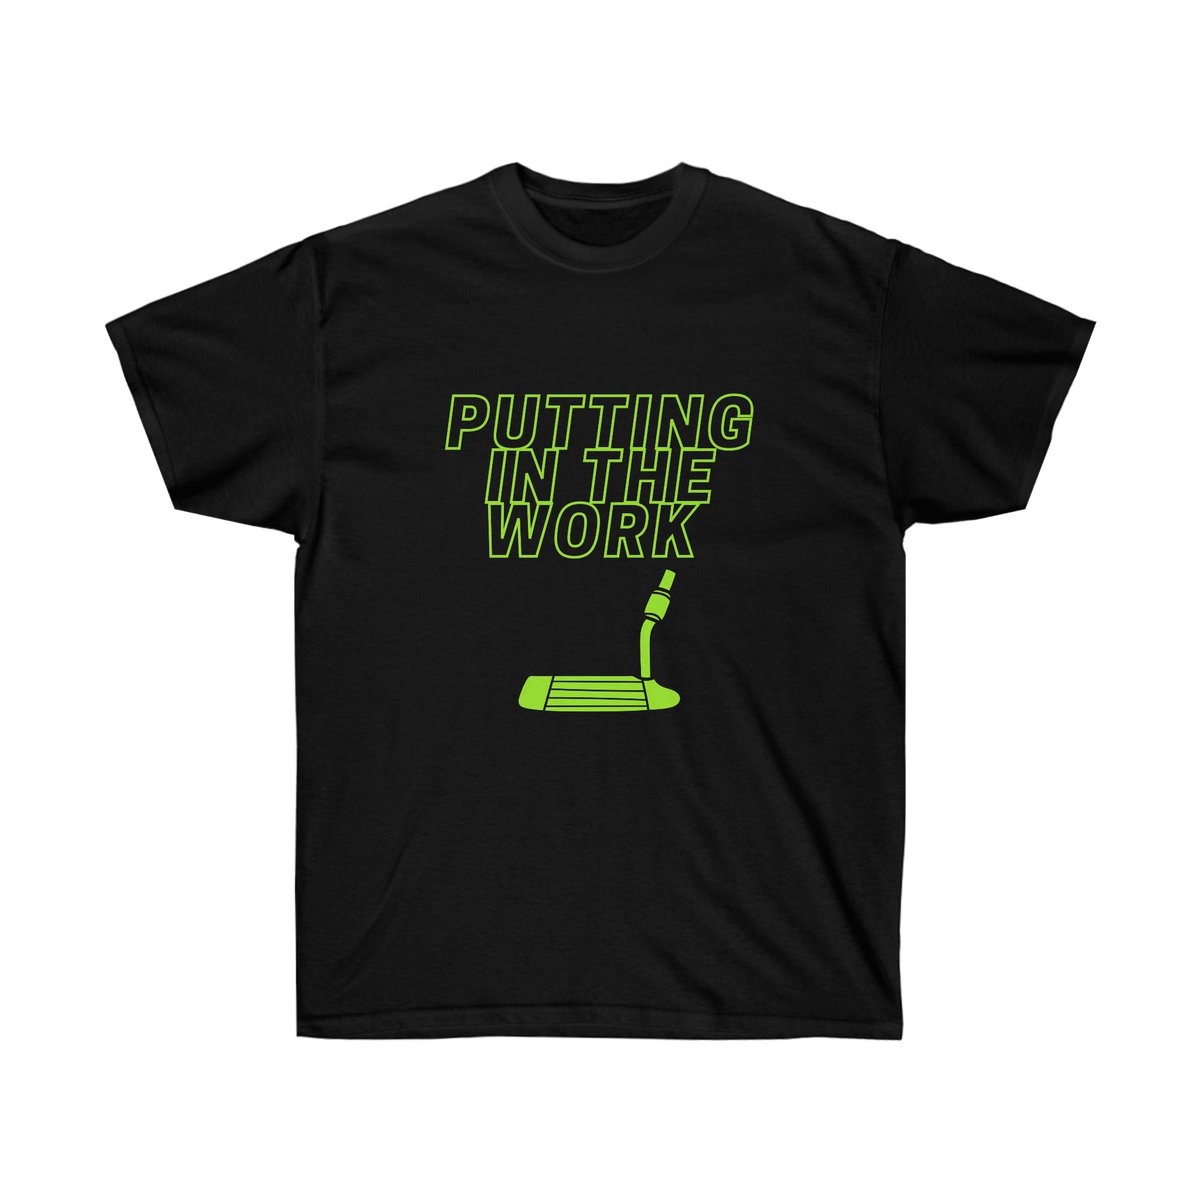 One for the Golfers #etsy shop: Putting in the work fun pun T-shirt, Unisex Ultra Cotton Tee for men and women, golf gifts etsy.me/41m6ZqY #giftforgolfer #funnygolfshirt #giftfordad #golftshirt #golfshirt #golfer #funnygolfgift #mensgolfs